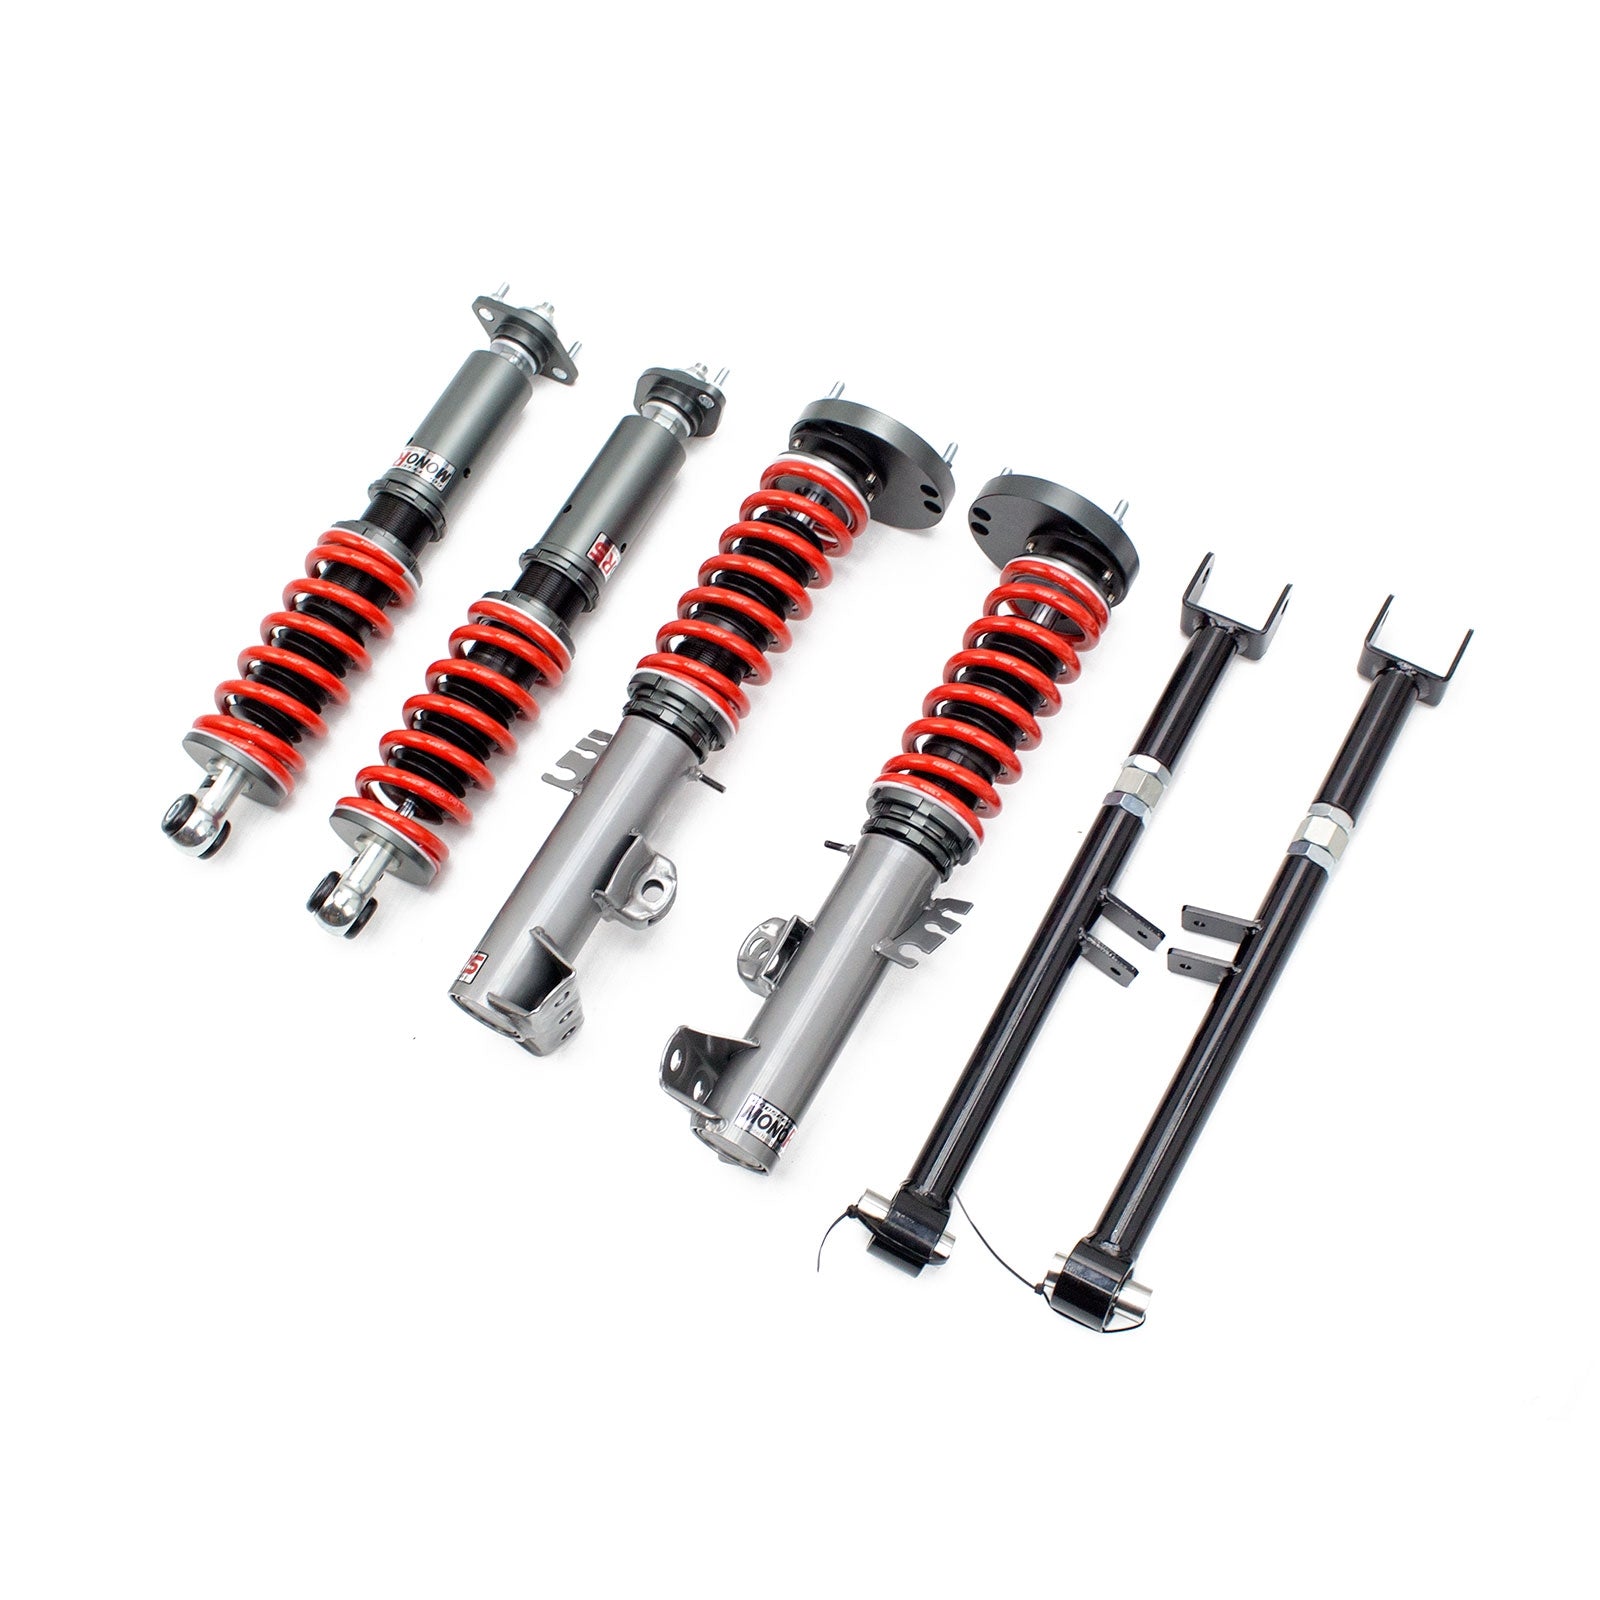 Godspeed MRS1418 MonoRS Coilovers Lowering Kit, True Coilover Conversion, 32 Damping Adjustments, Ride Height Ajustable